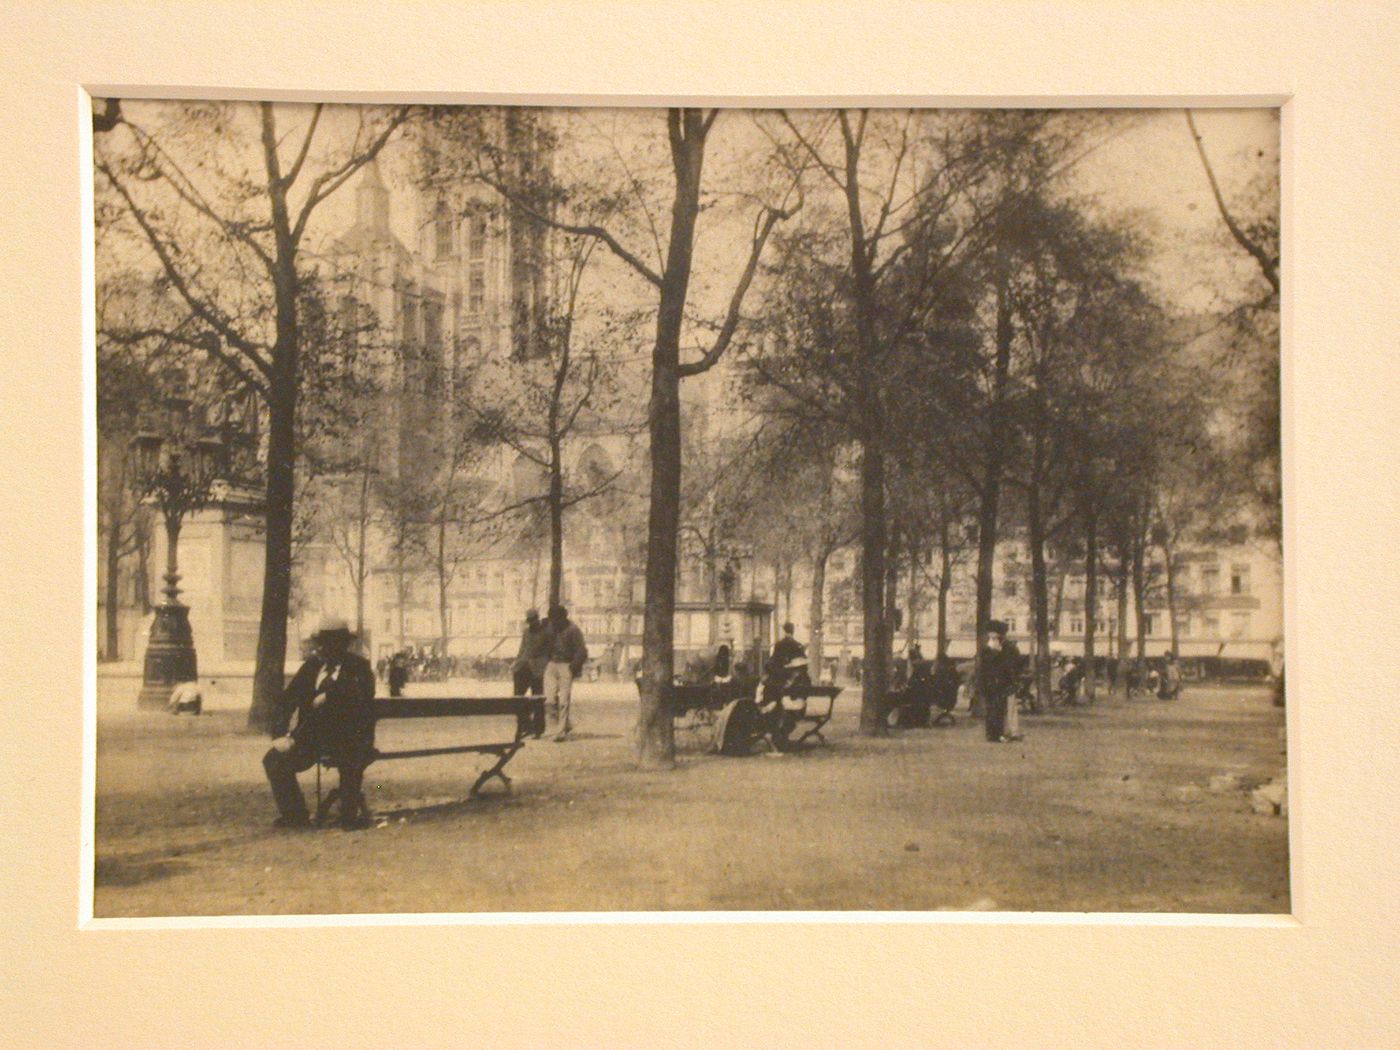 People sitting and strolling in a park, New York City, New York, United States